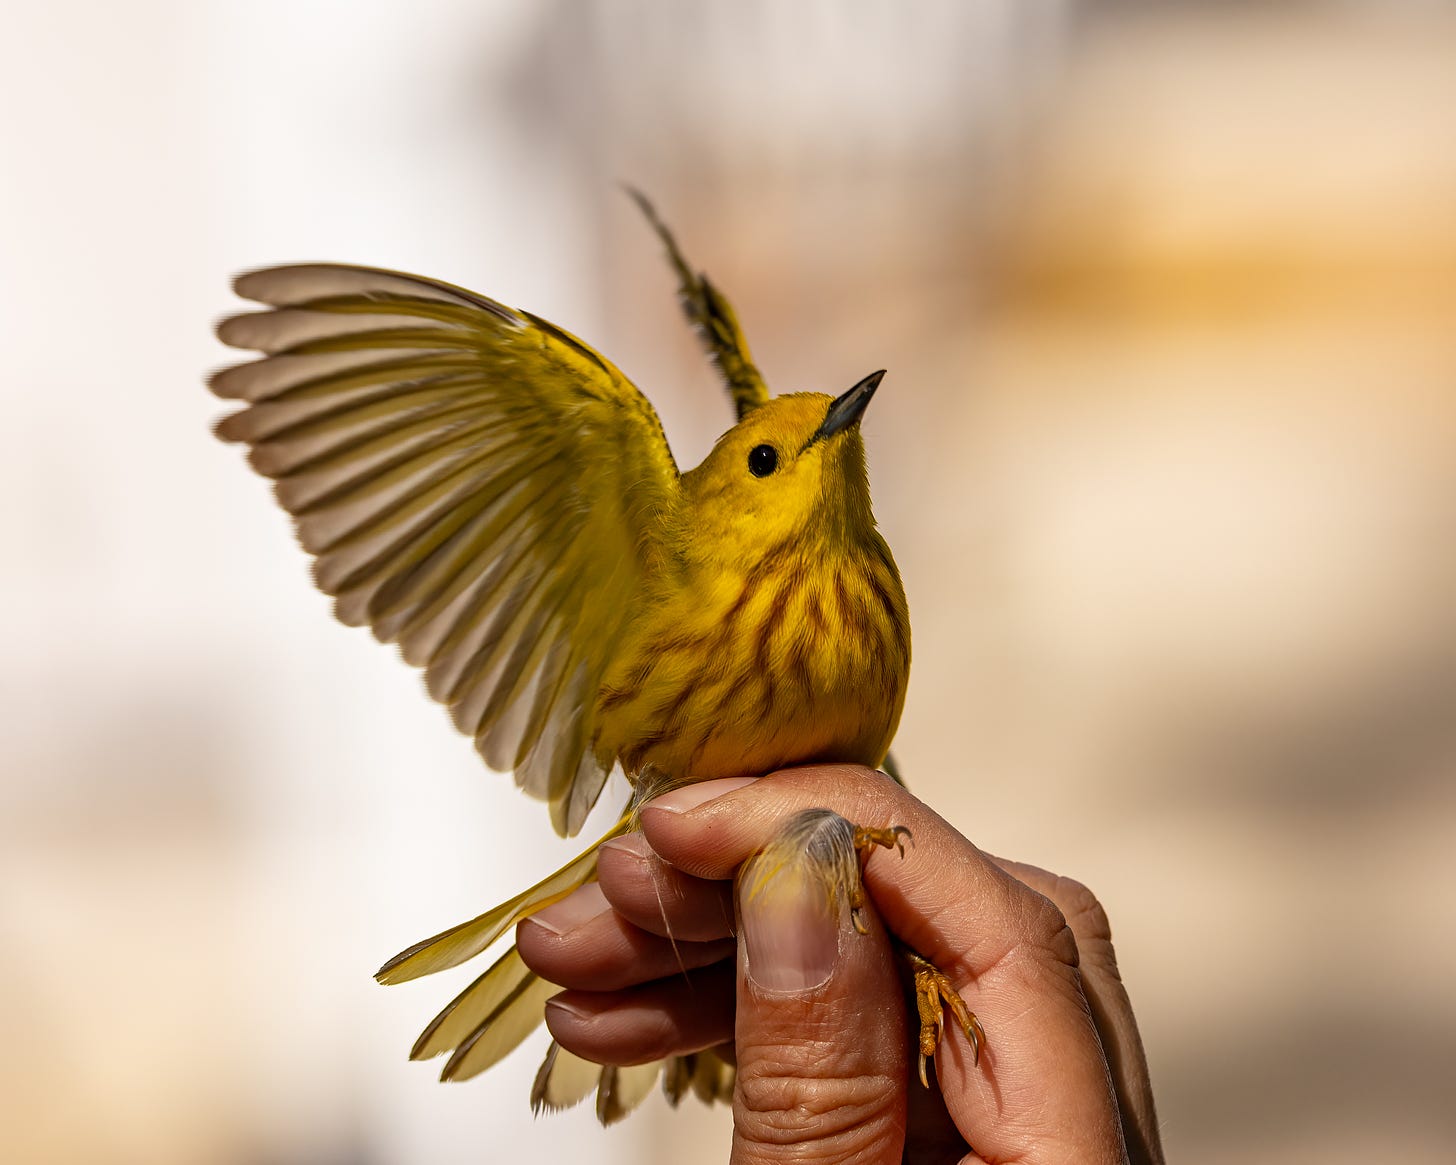 In this image, a human hand shows a yellow warbler being held. It is flapping its wings, and you can see the bright red streaks on its chest.